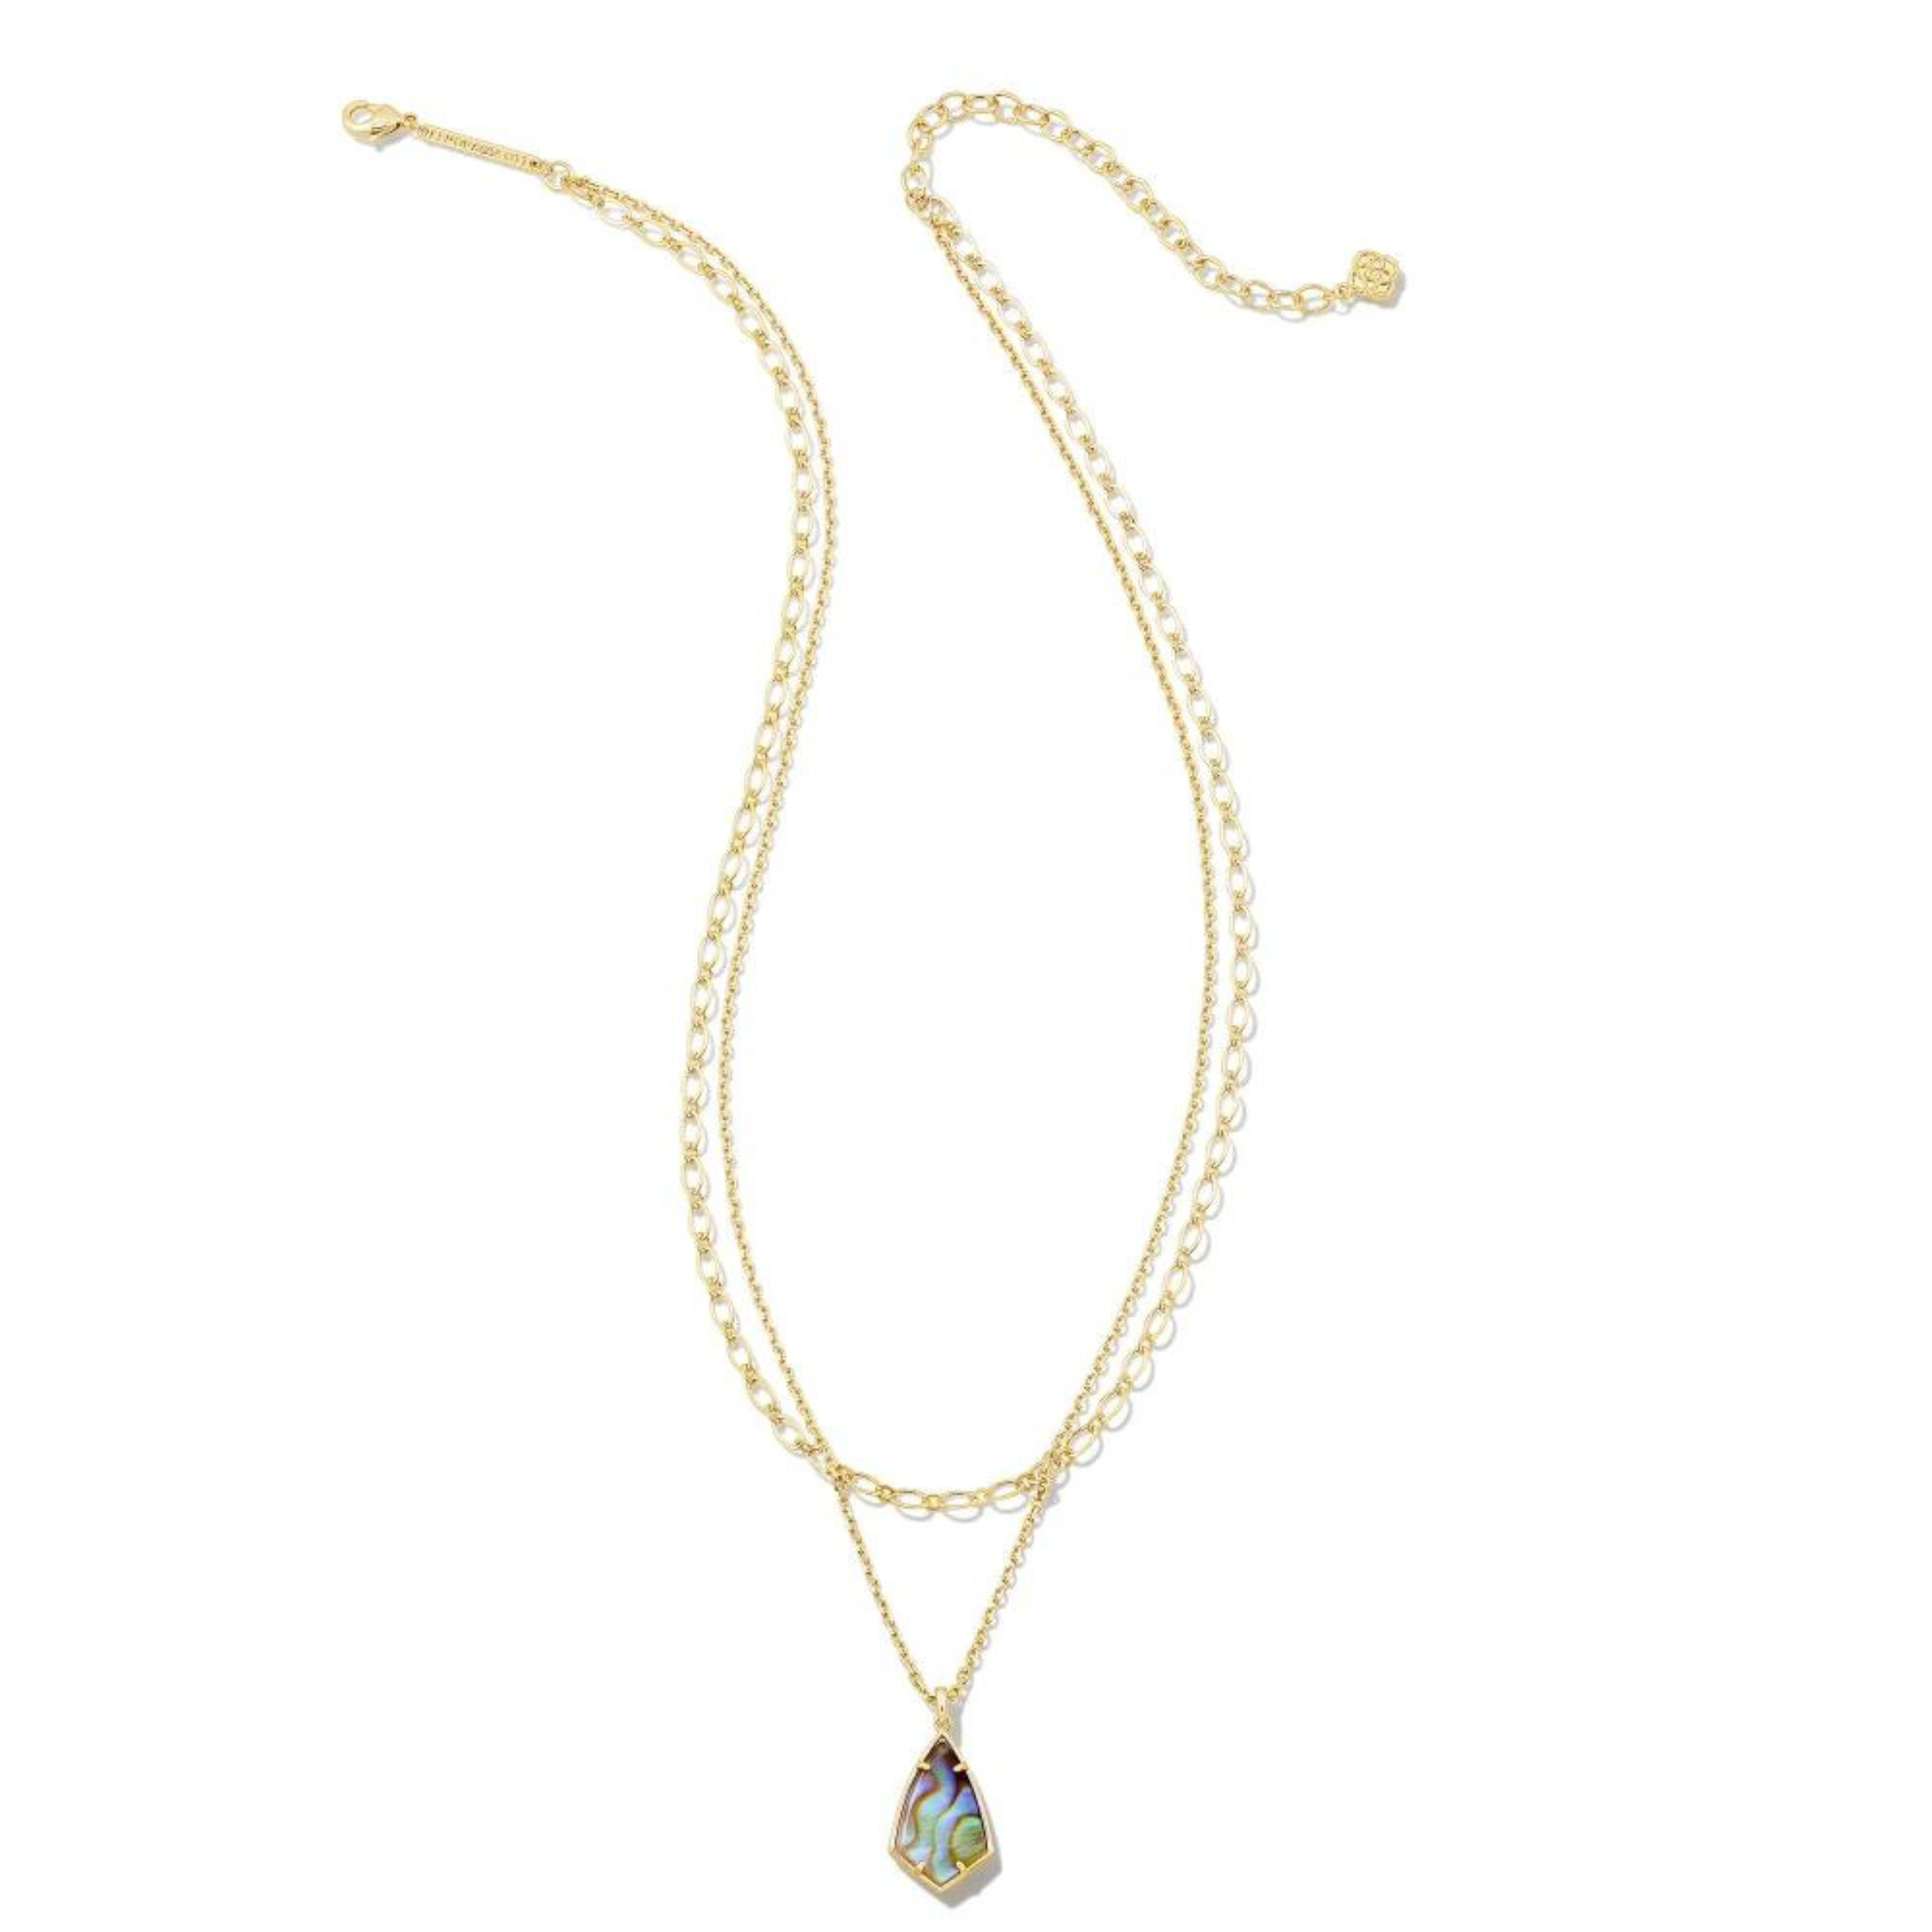 Kendra Scott | Camry Gold Multi Strand Necklace in Iridescent Abalone - Giddy Up Glamour Boutique